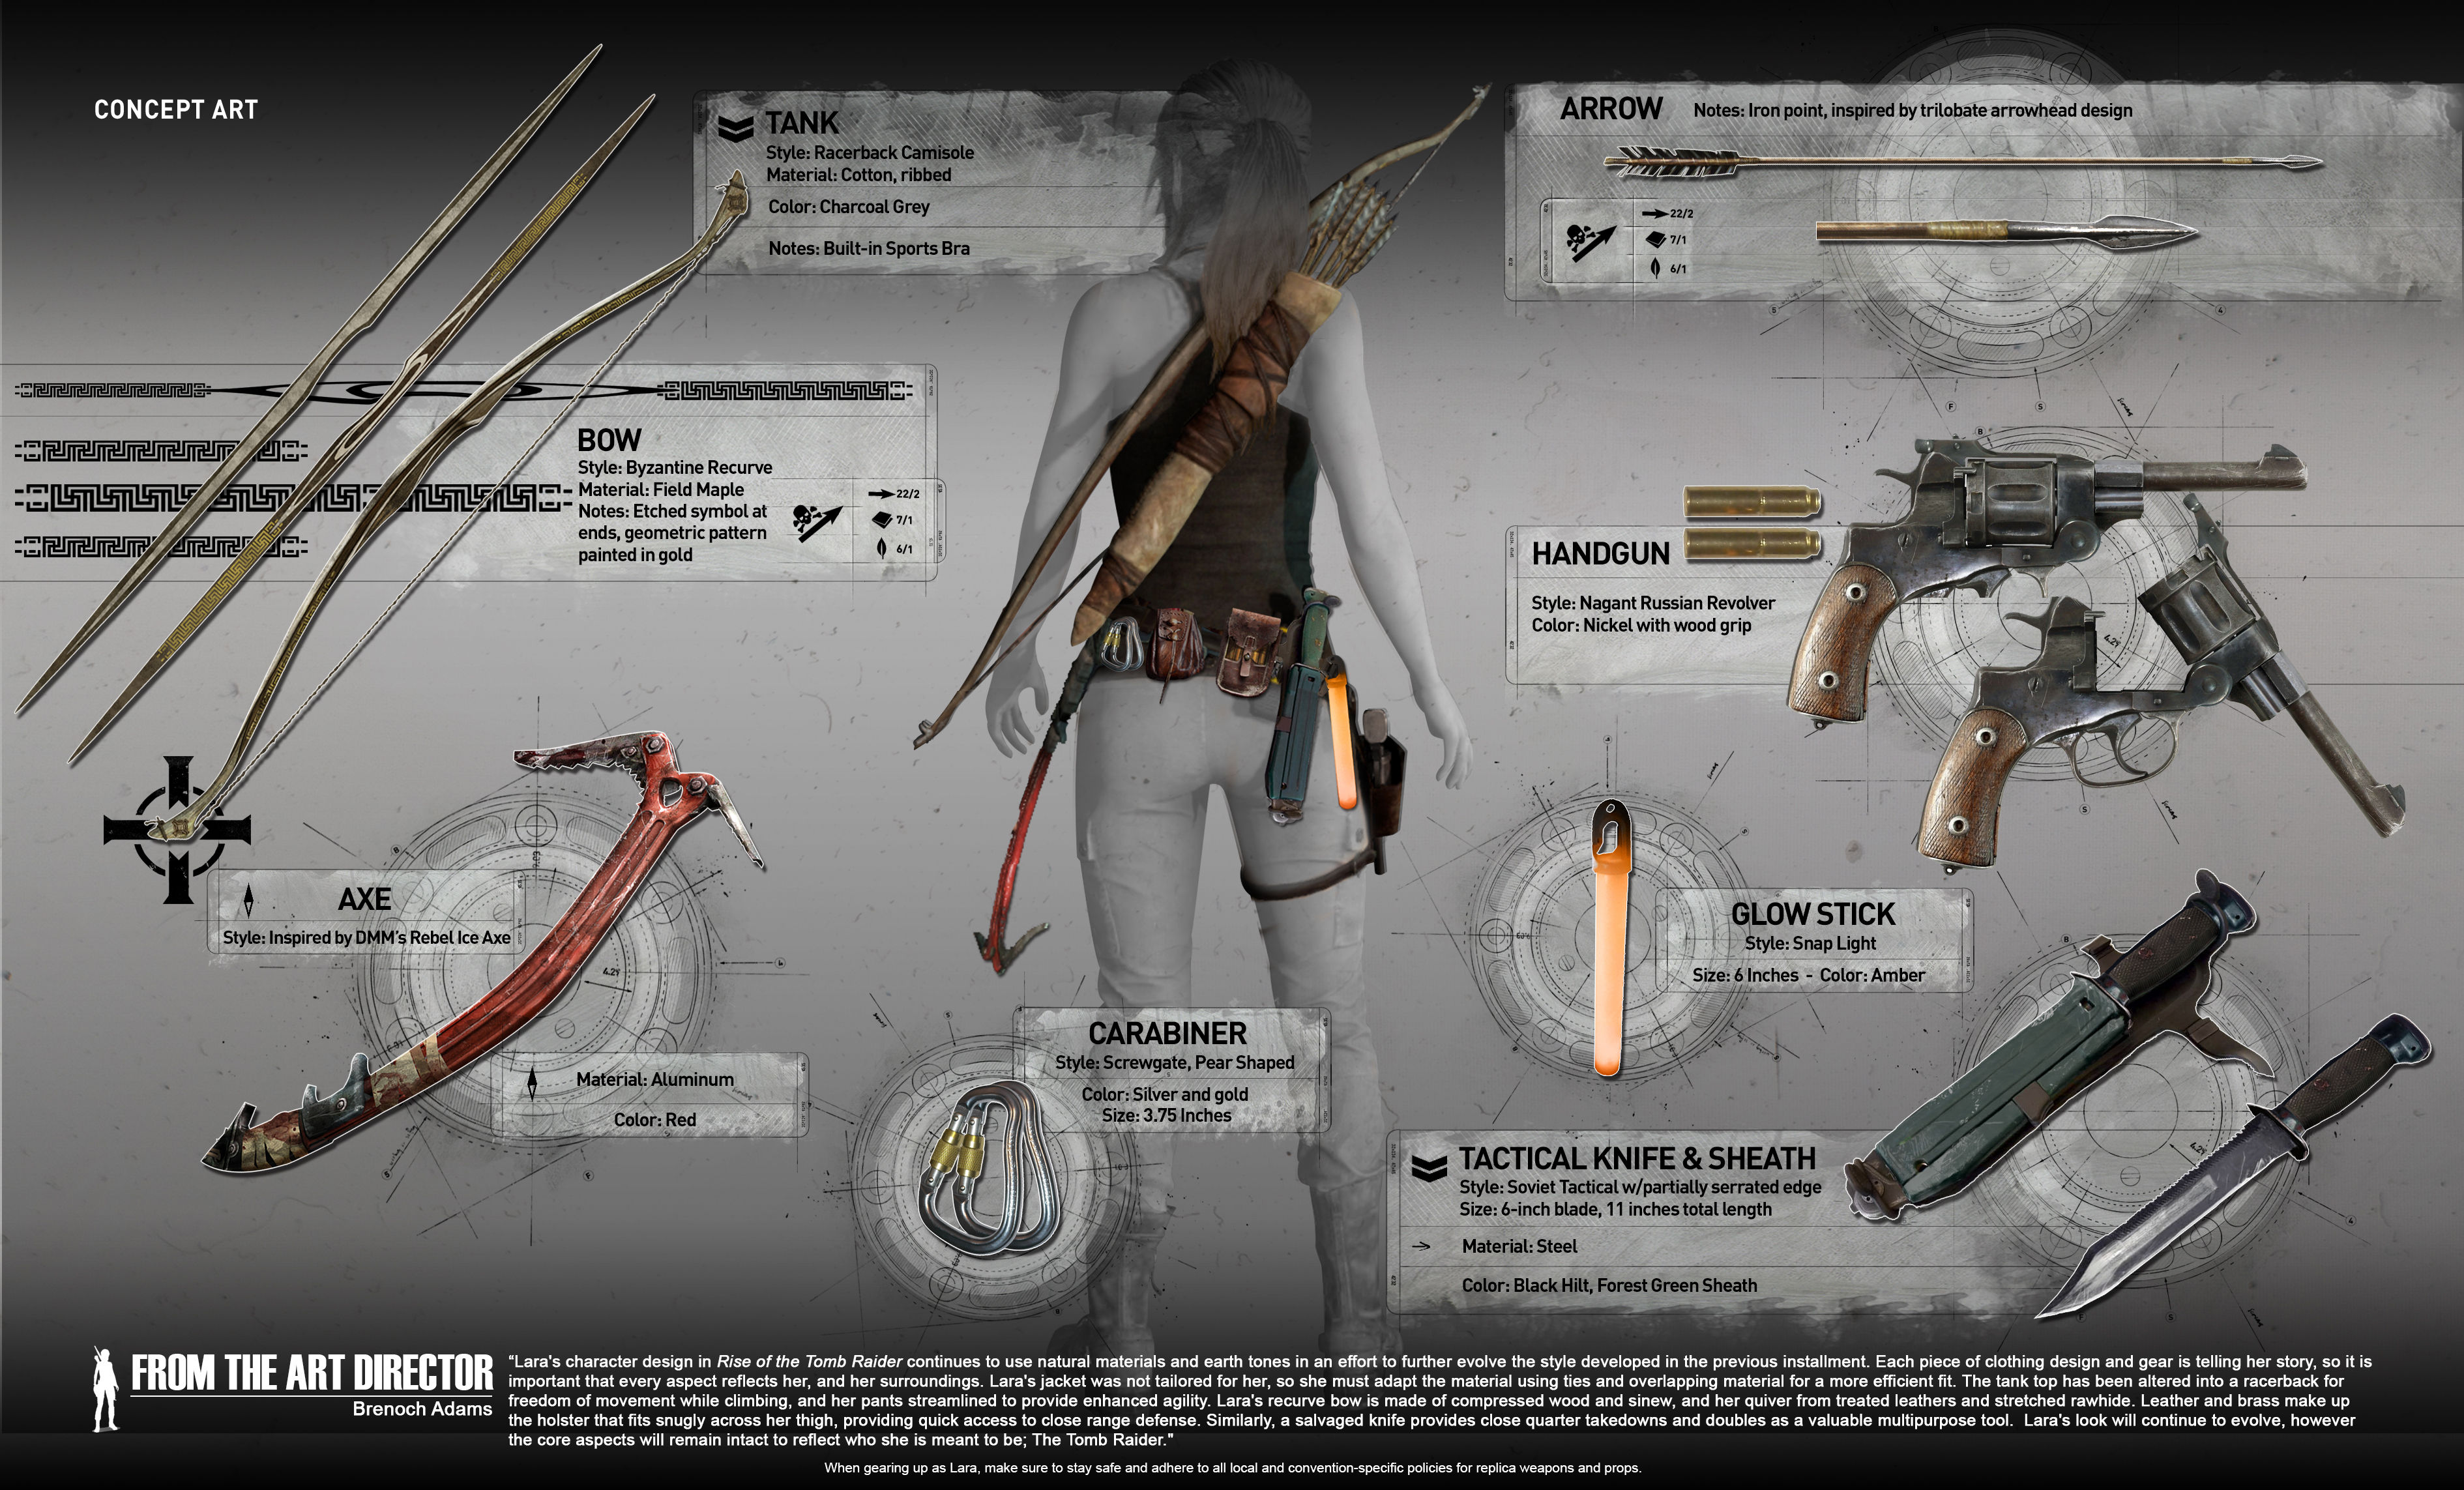 Lara Croft Will Have a Variety of Weapons and Gear